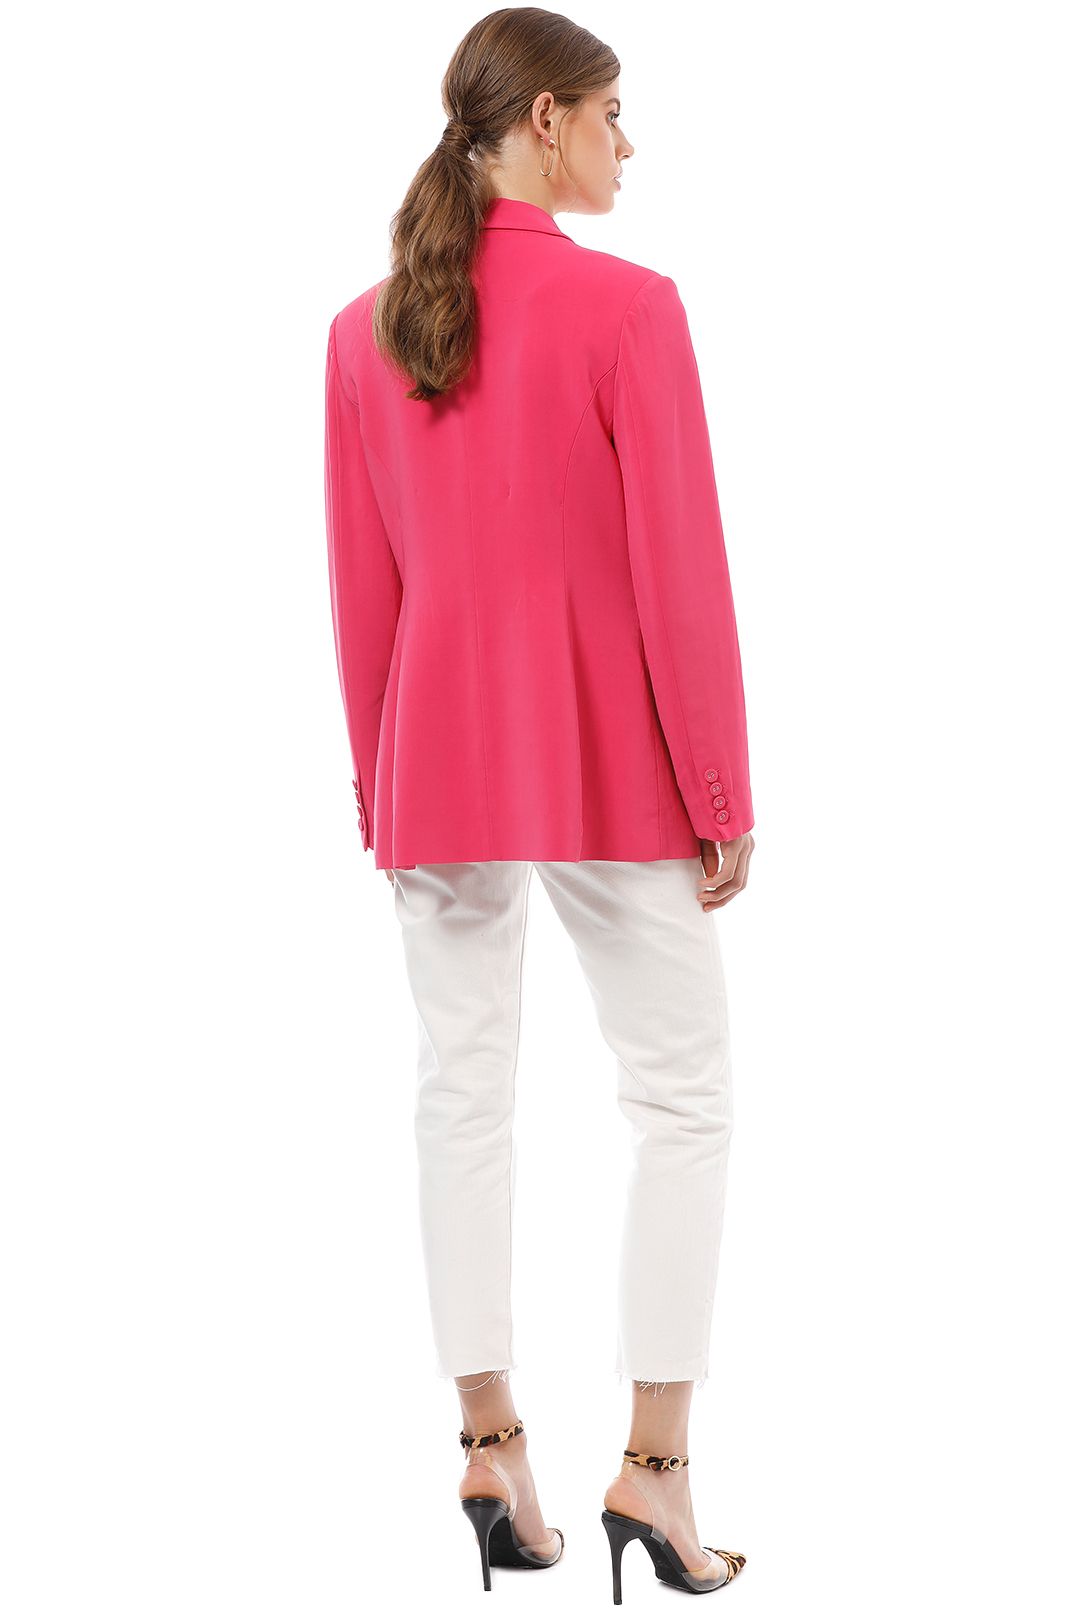 CMEO Collective - Own Light Blazer - Pink - Back